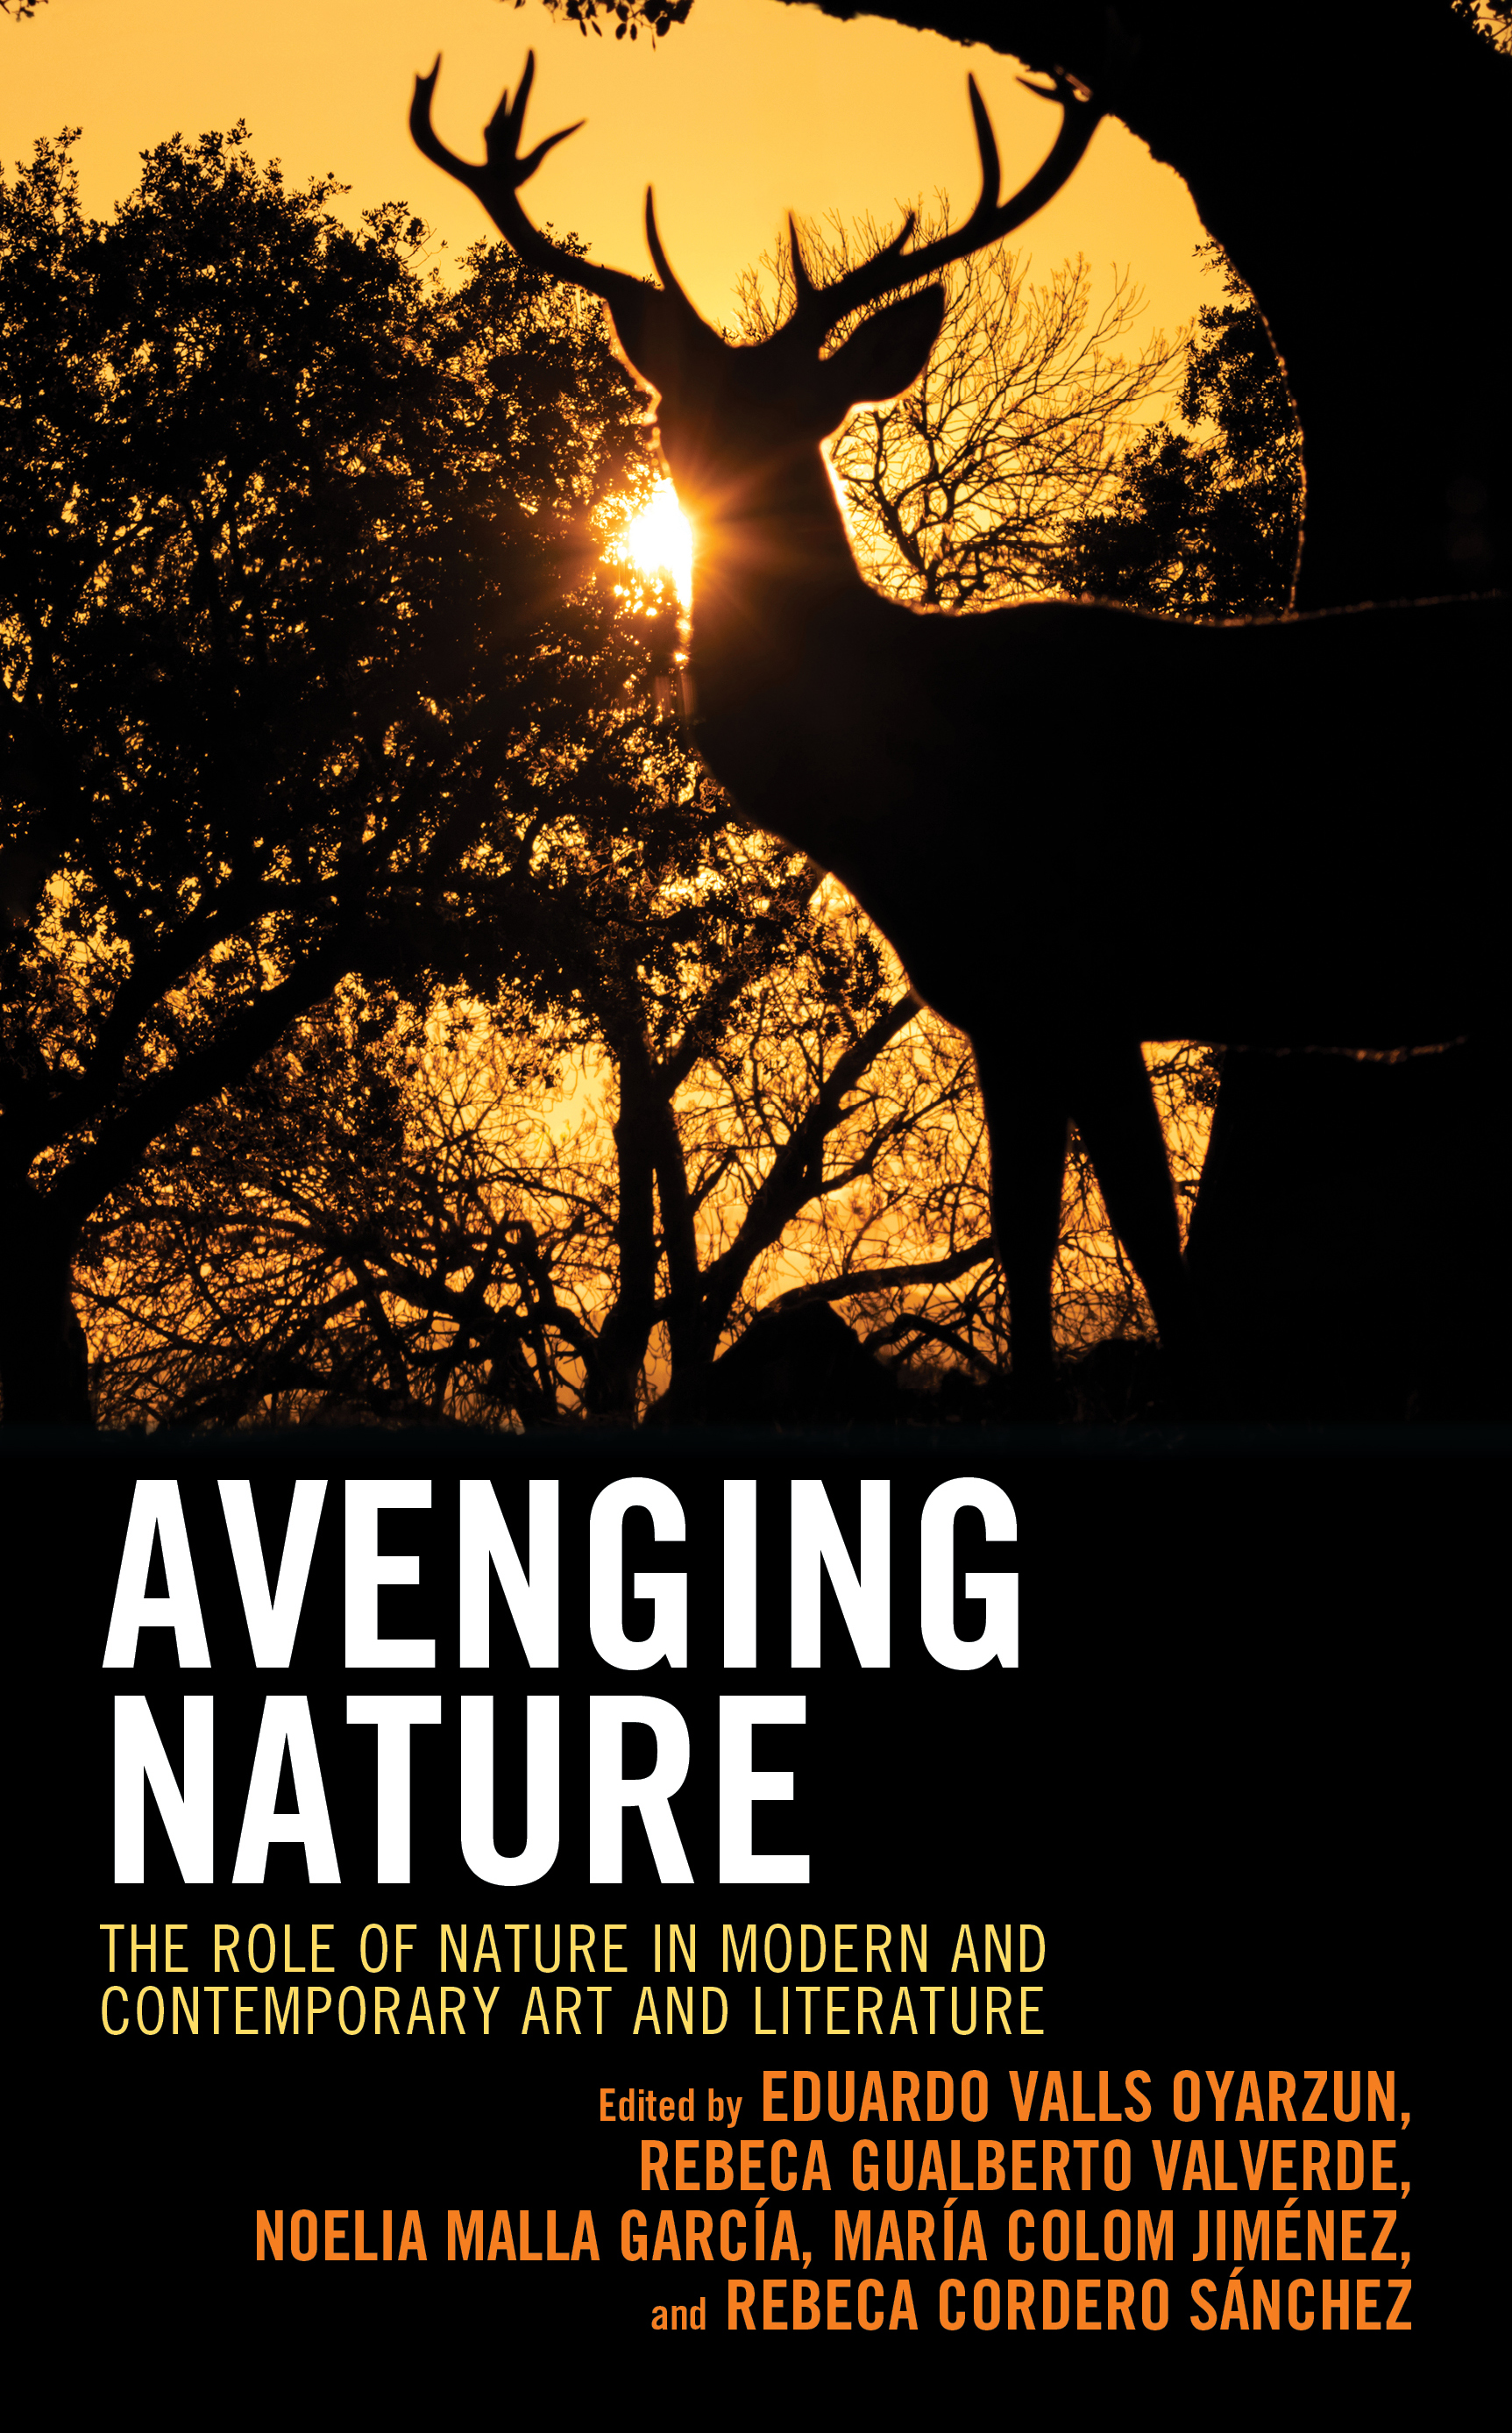 Avenging Nature: The Role of Nature in Modern and Contemporary Art and Literature